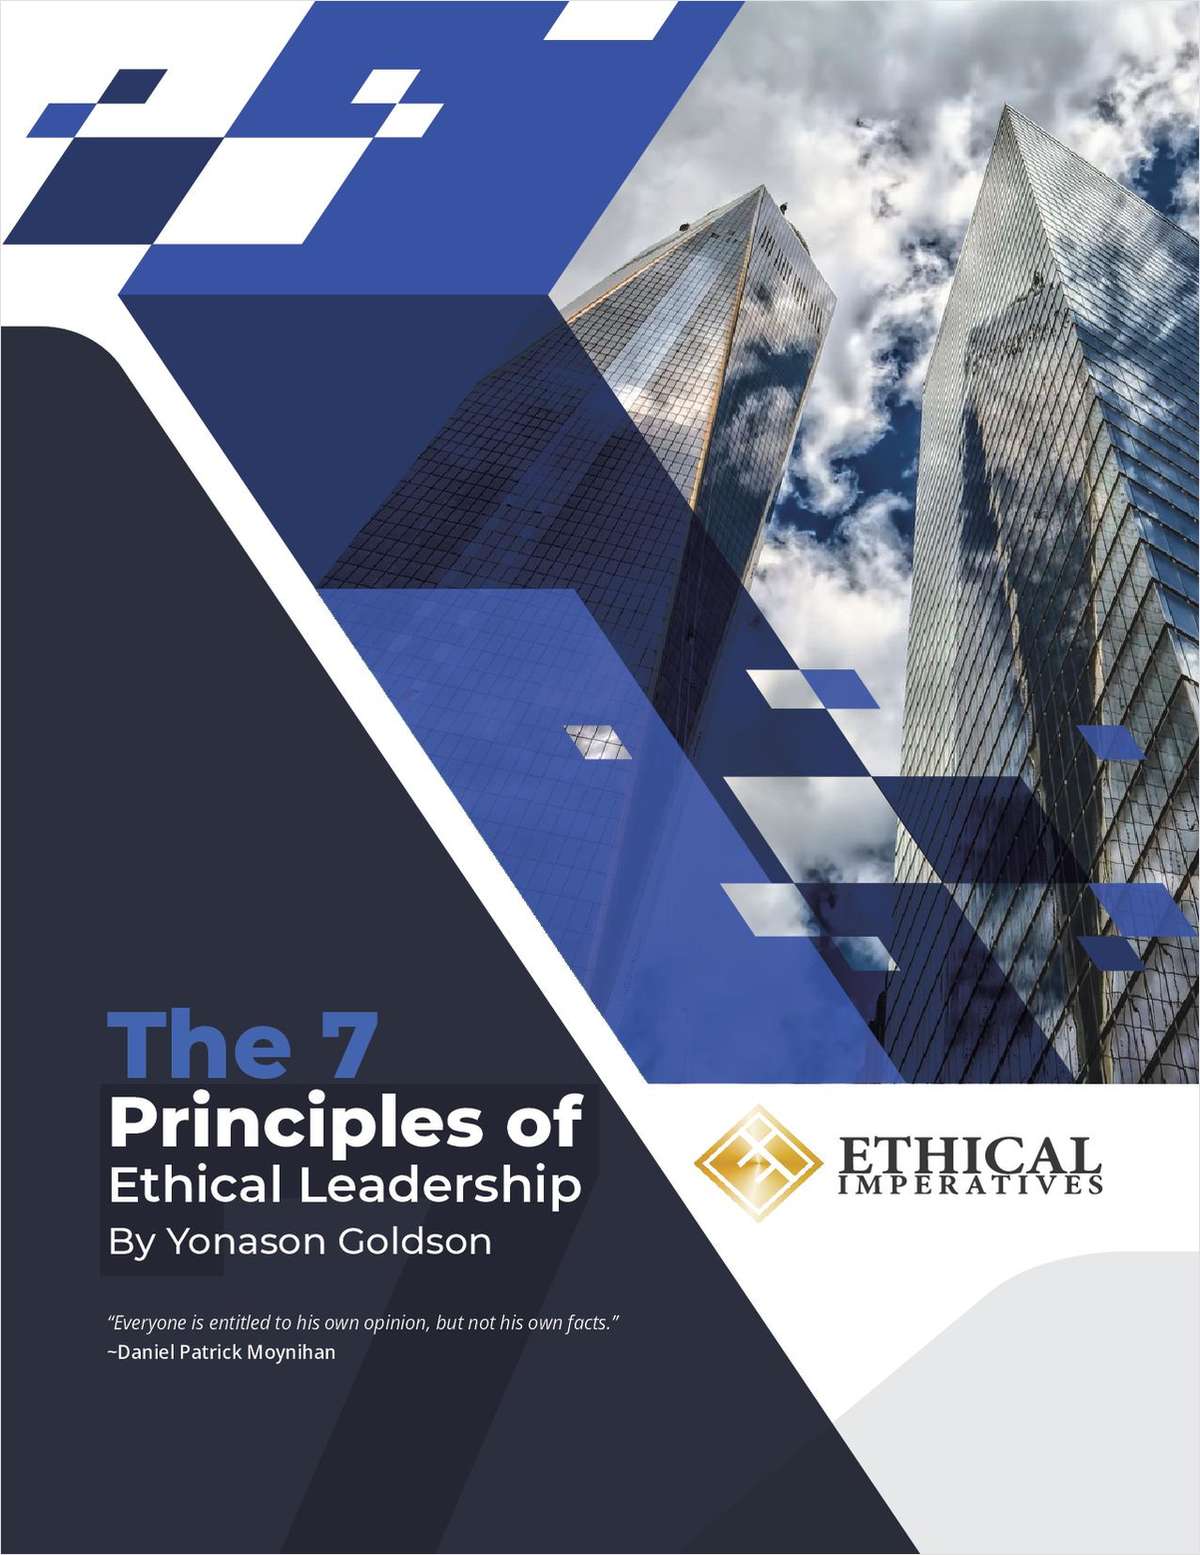 The 7 Principles of Ethical Leadership